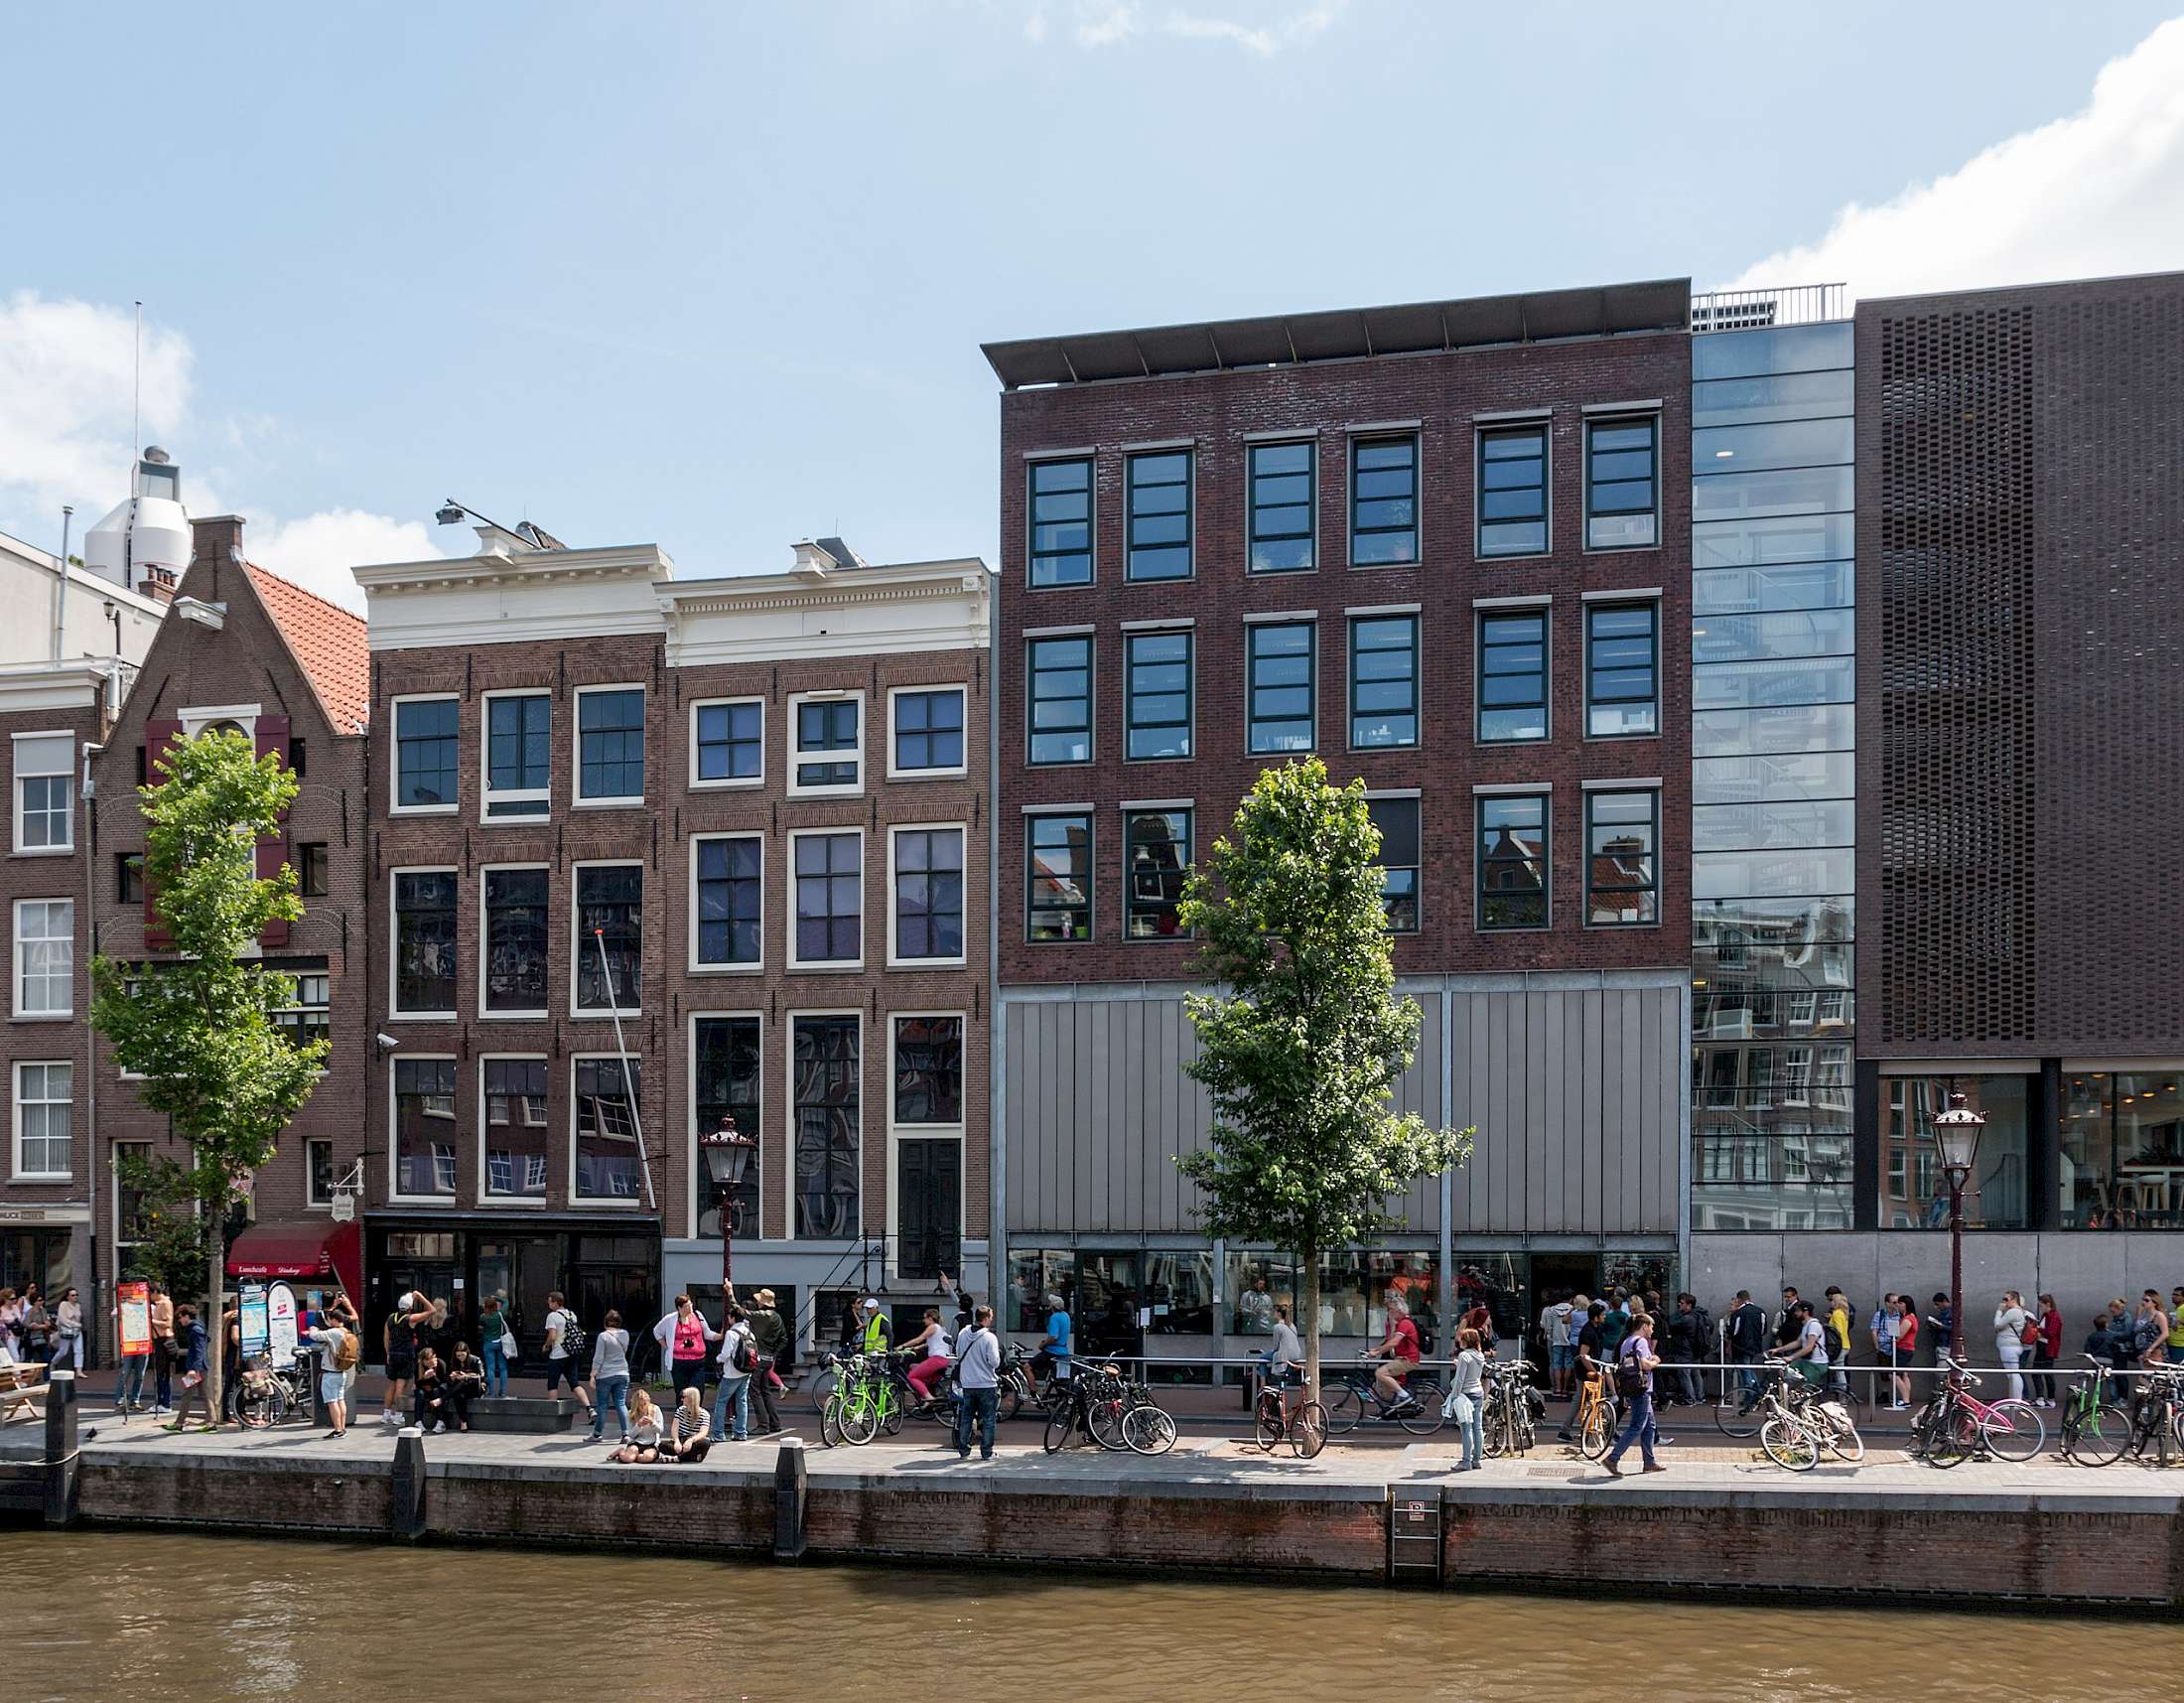 Anne Frank House is a must when in Amsterdam. The line can be over 1 mile and hours. Reserve your space before you go!